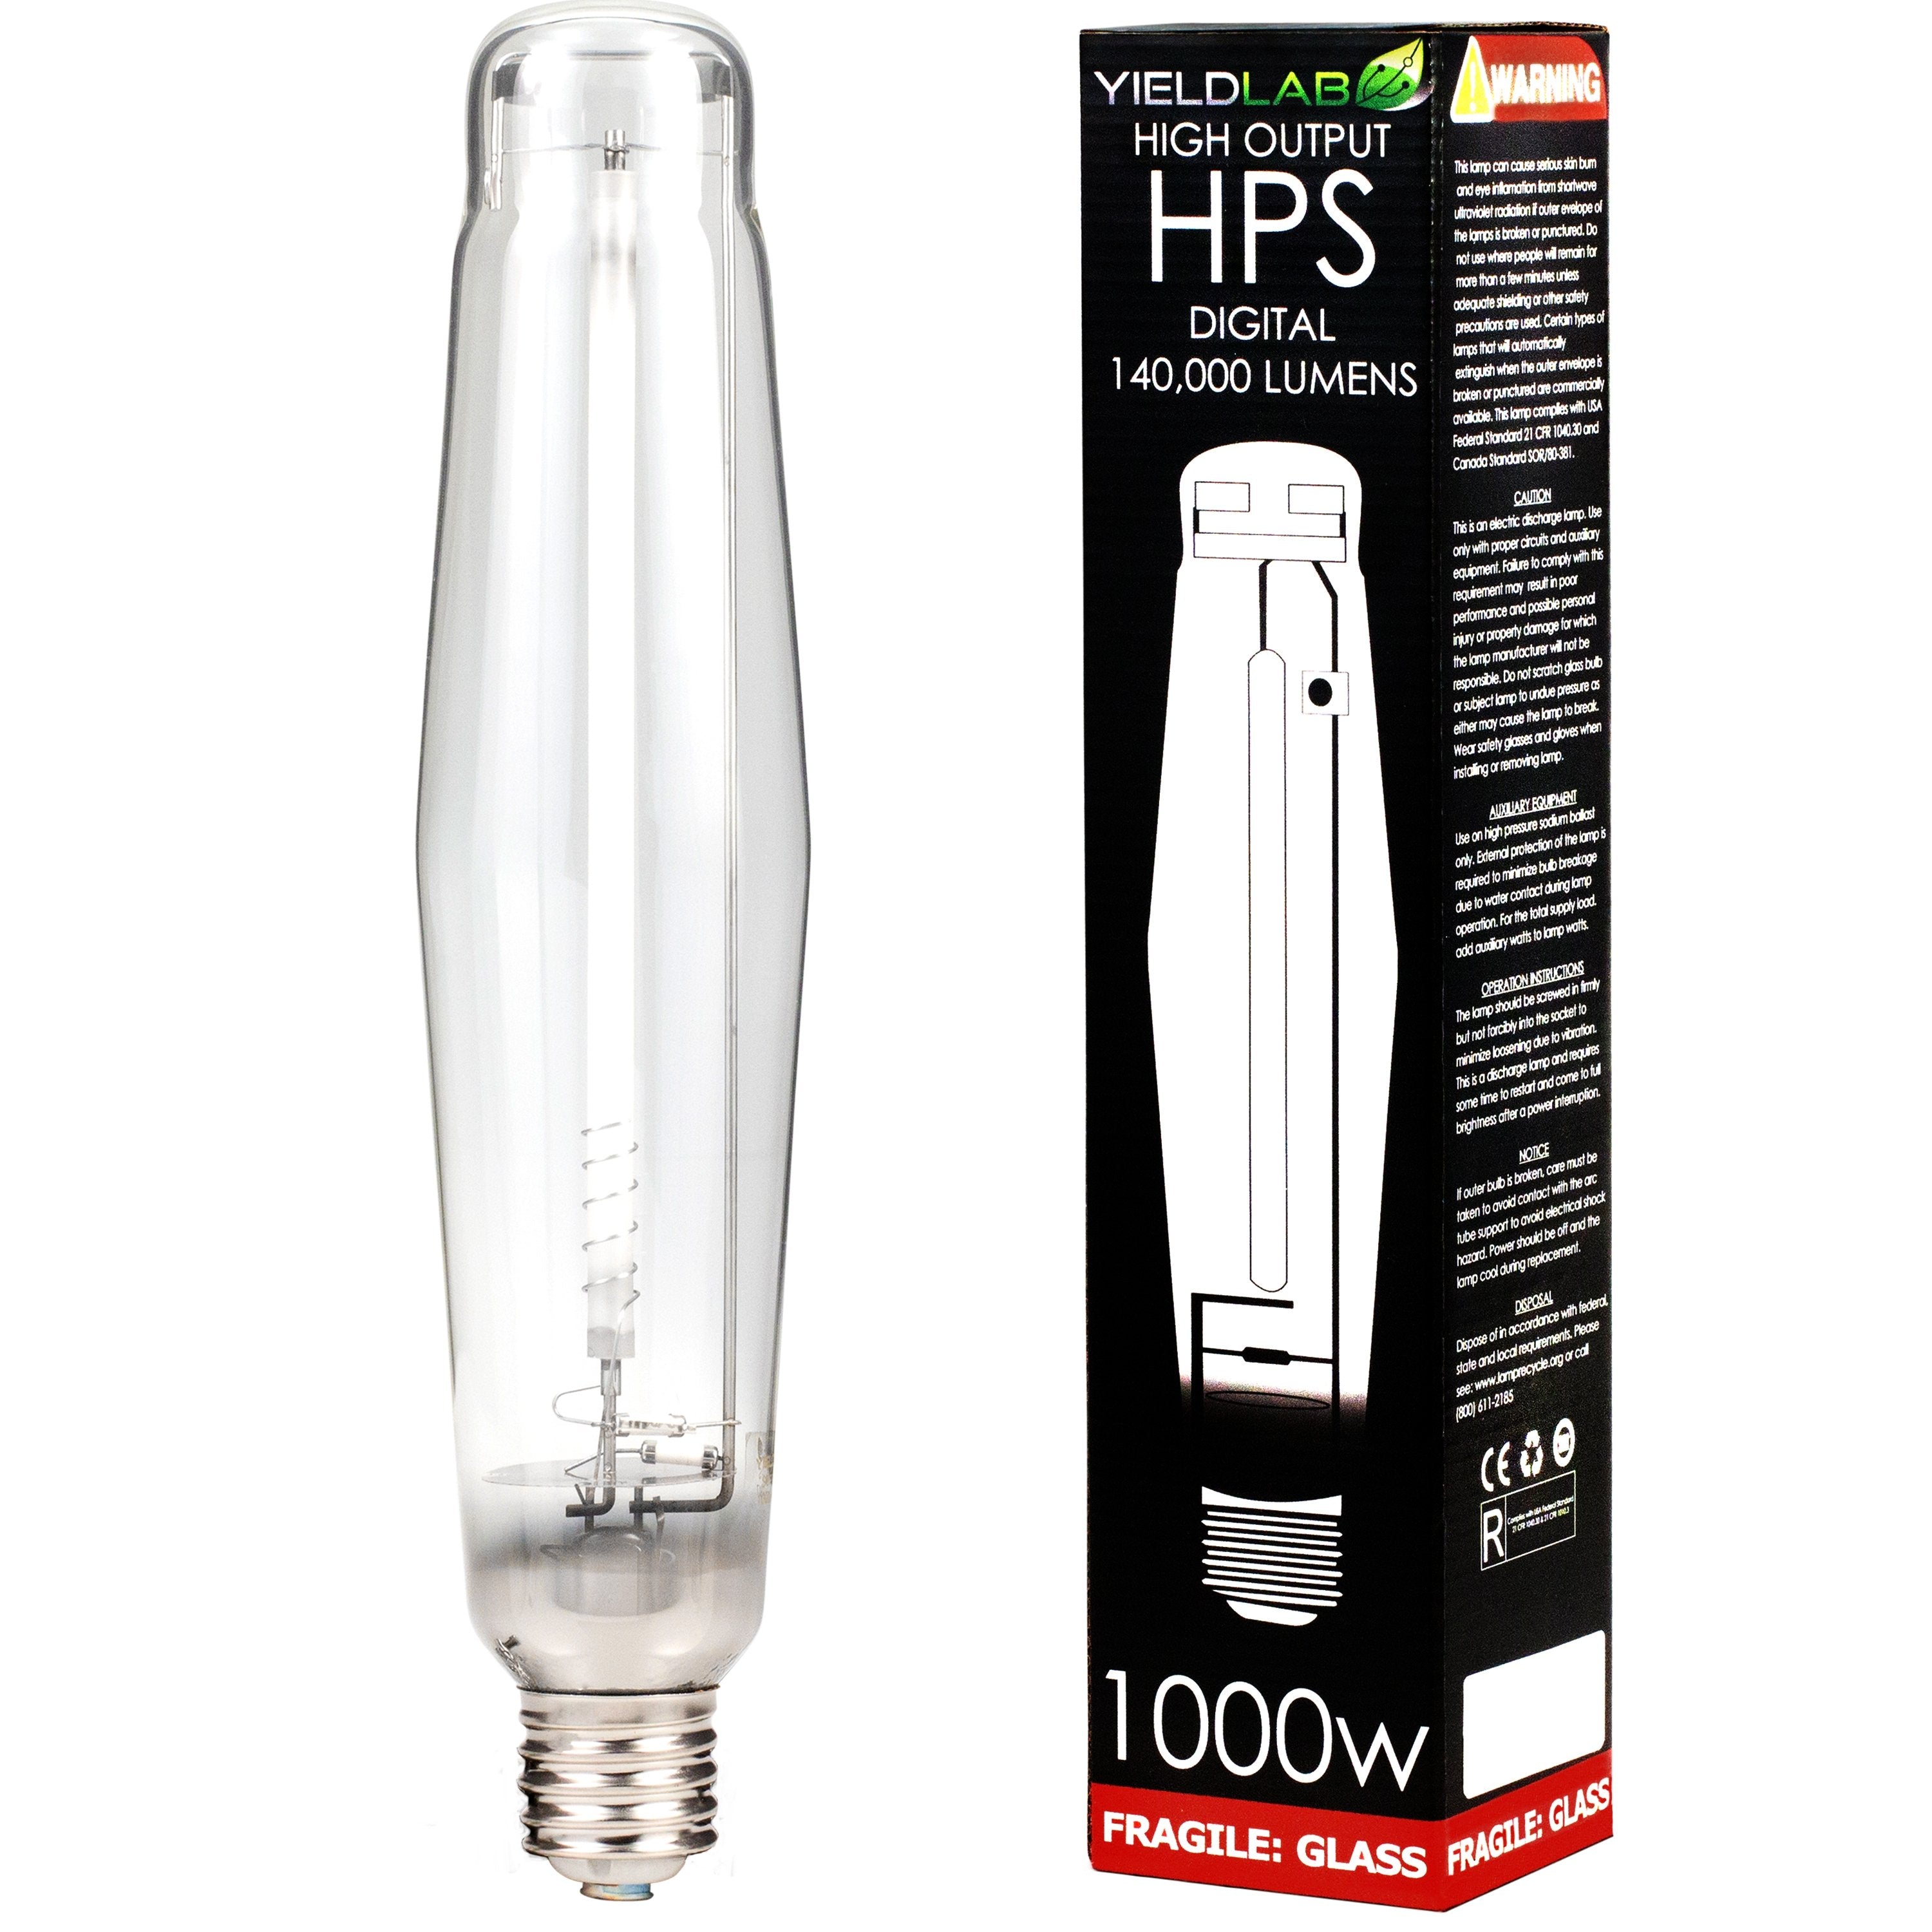 Yield 1000W HPS Greenhouse Hydroponic Grow Light Flower and Bloom HID Replacement Bulb